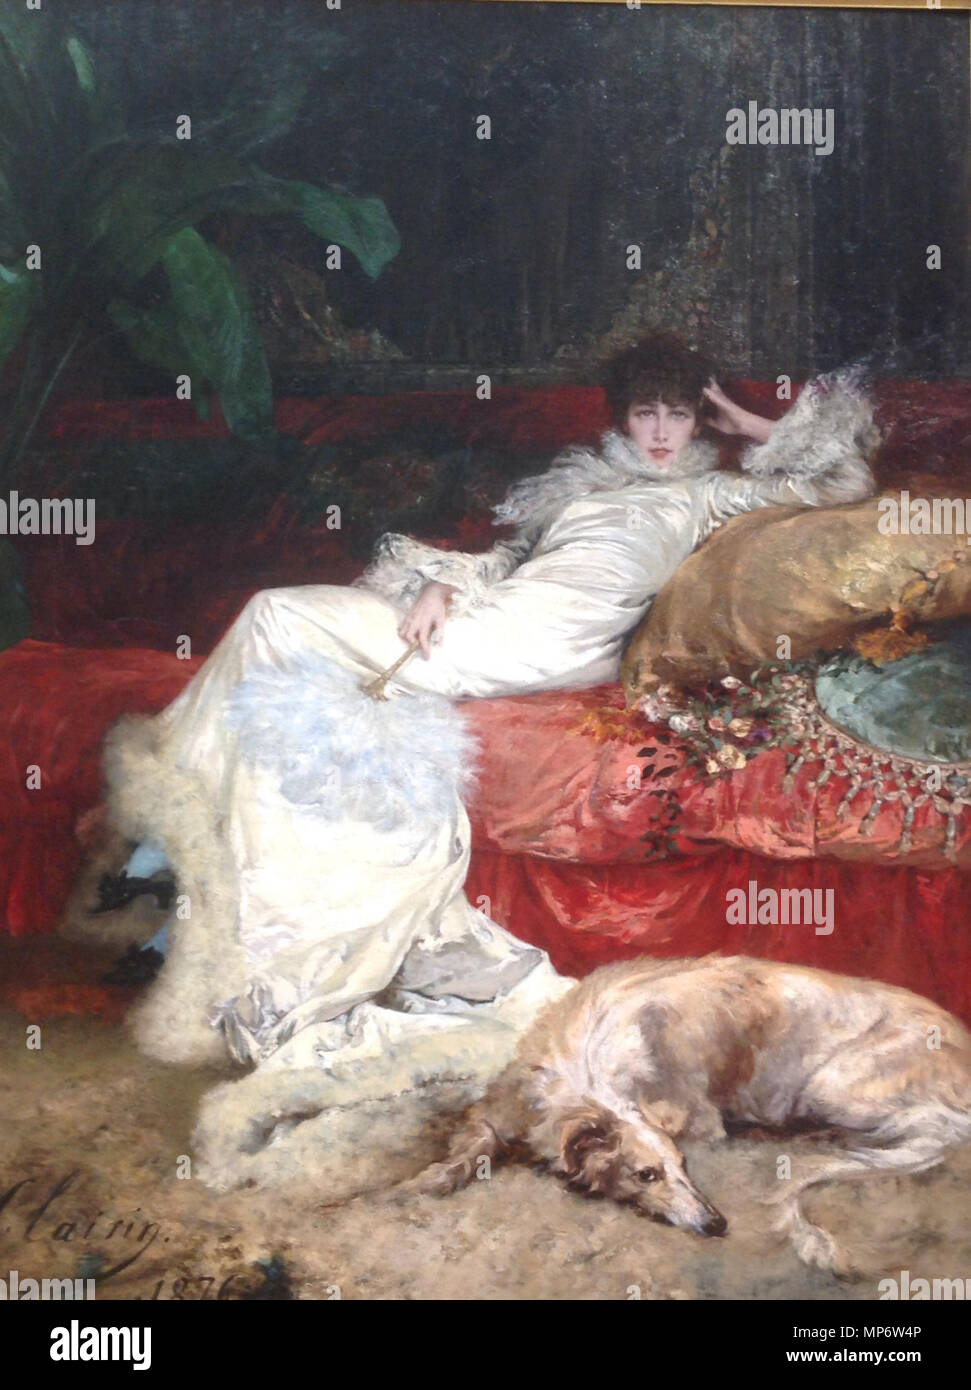 . English: Portrait of Sarah Bernhardt. Displayed in Salon of 1876, now in the Petit Palais, Paris. 13 April 2017, 13:28:46.   Georges Clairin  (1843–1919)     Alternative names Georges Jules Victor Clairin; Jules-Georges-Victor Clairin; Clairin; g. clairin; geo. clairin  Description French painter and illustrator  Date of birth/death 11 September 1843 2 September 1919  Location of birth/death Paris Belle-Île-en-Mer  Authority control  : Q1398223 VIAF: 8141920 ISNI: 0000 0001 1740 9767 ULAN: 500021209 LCCN: n95074887 GND: 116524928 WorldCat 1095 Sarah Bernhardt by Georges Clairin (1876) Stock Photo